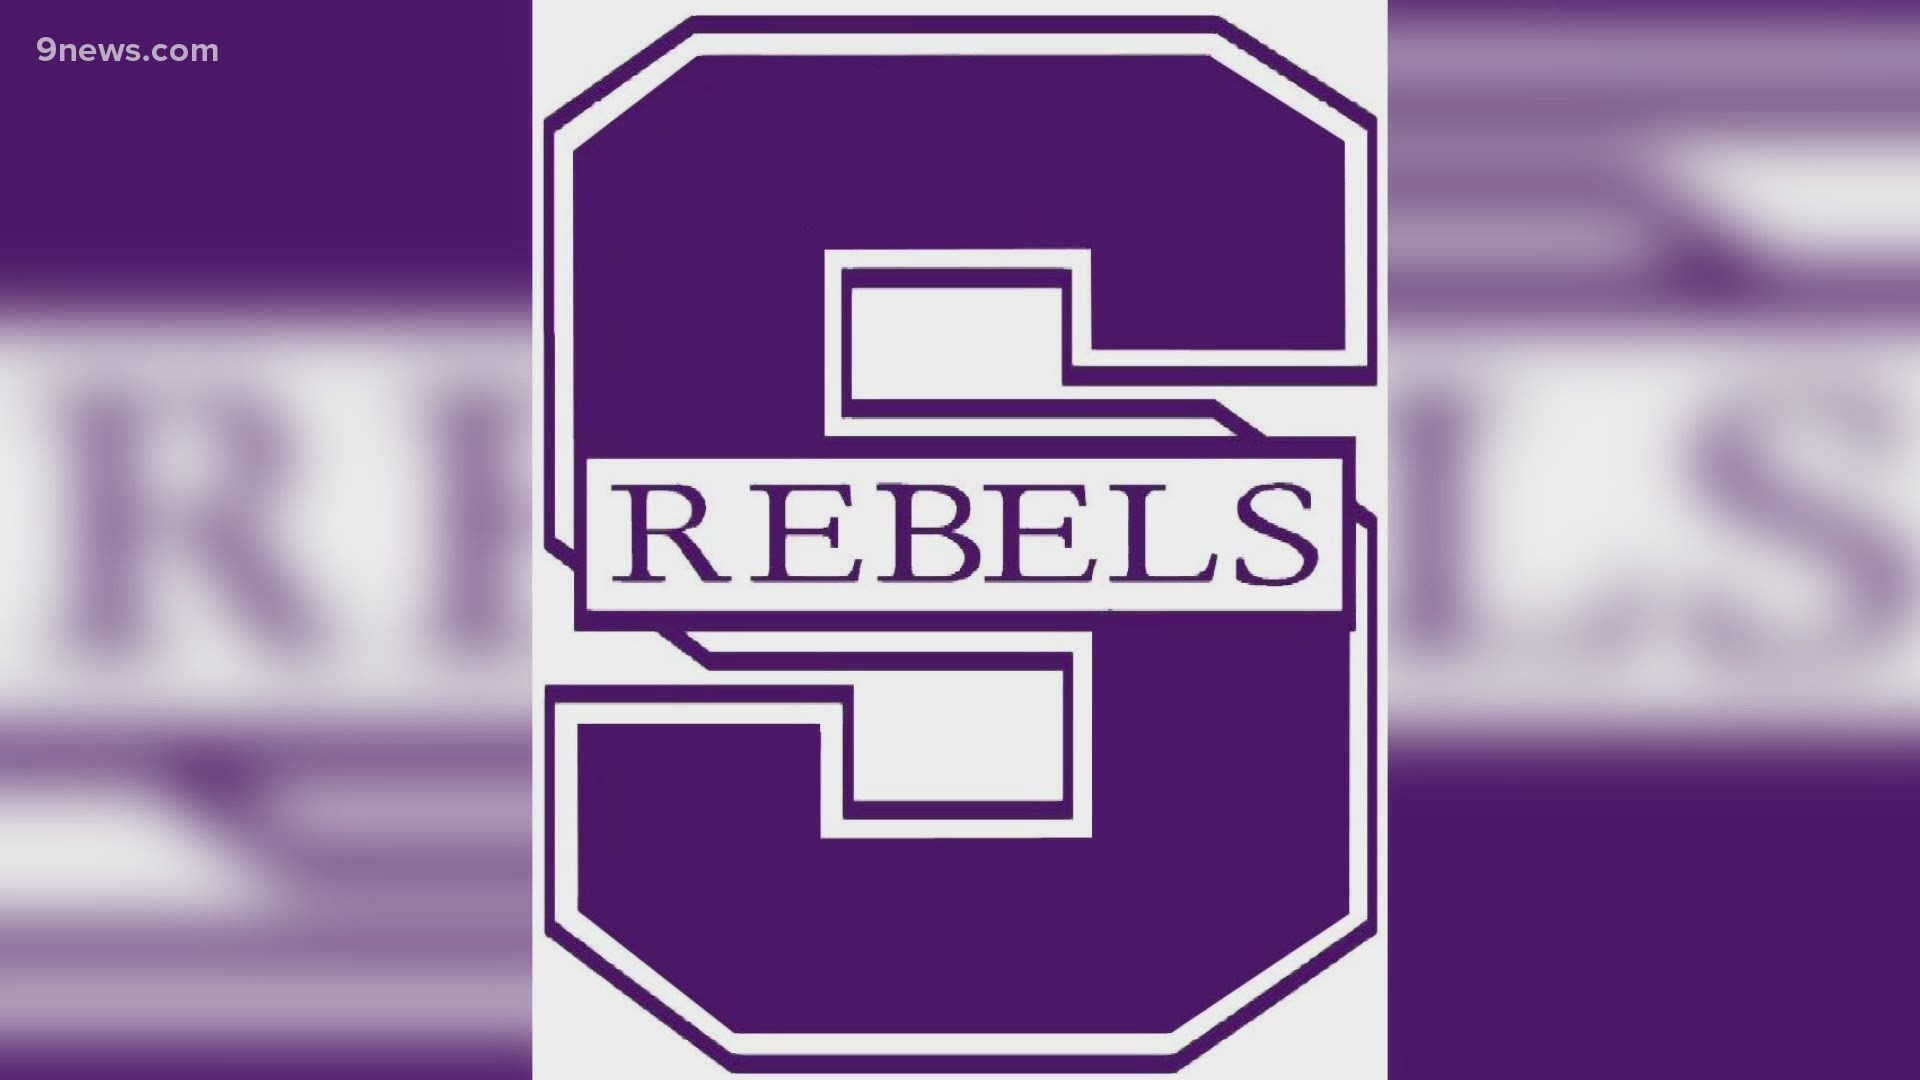 The highschool changed their mascot due to ties to the confederacy, Rebels to Ravens